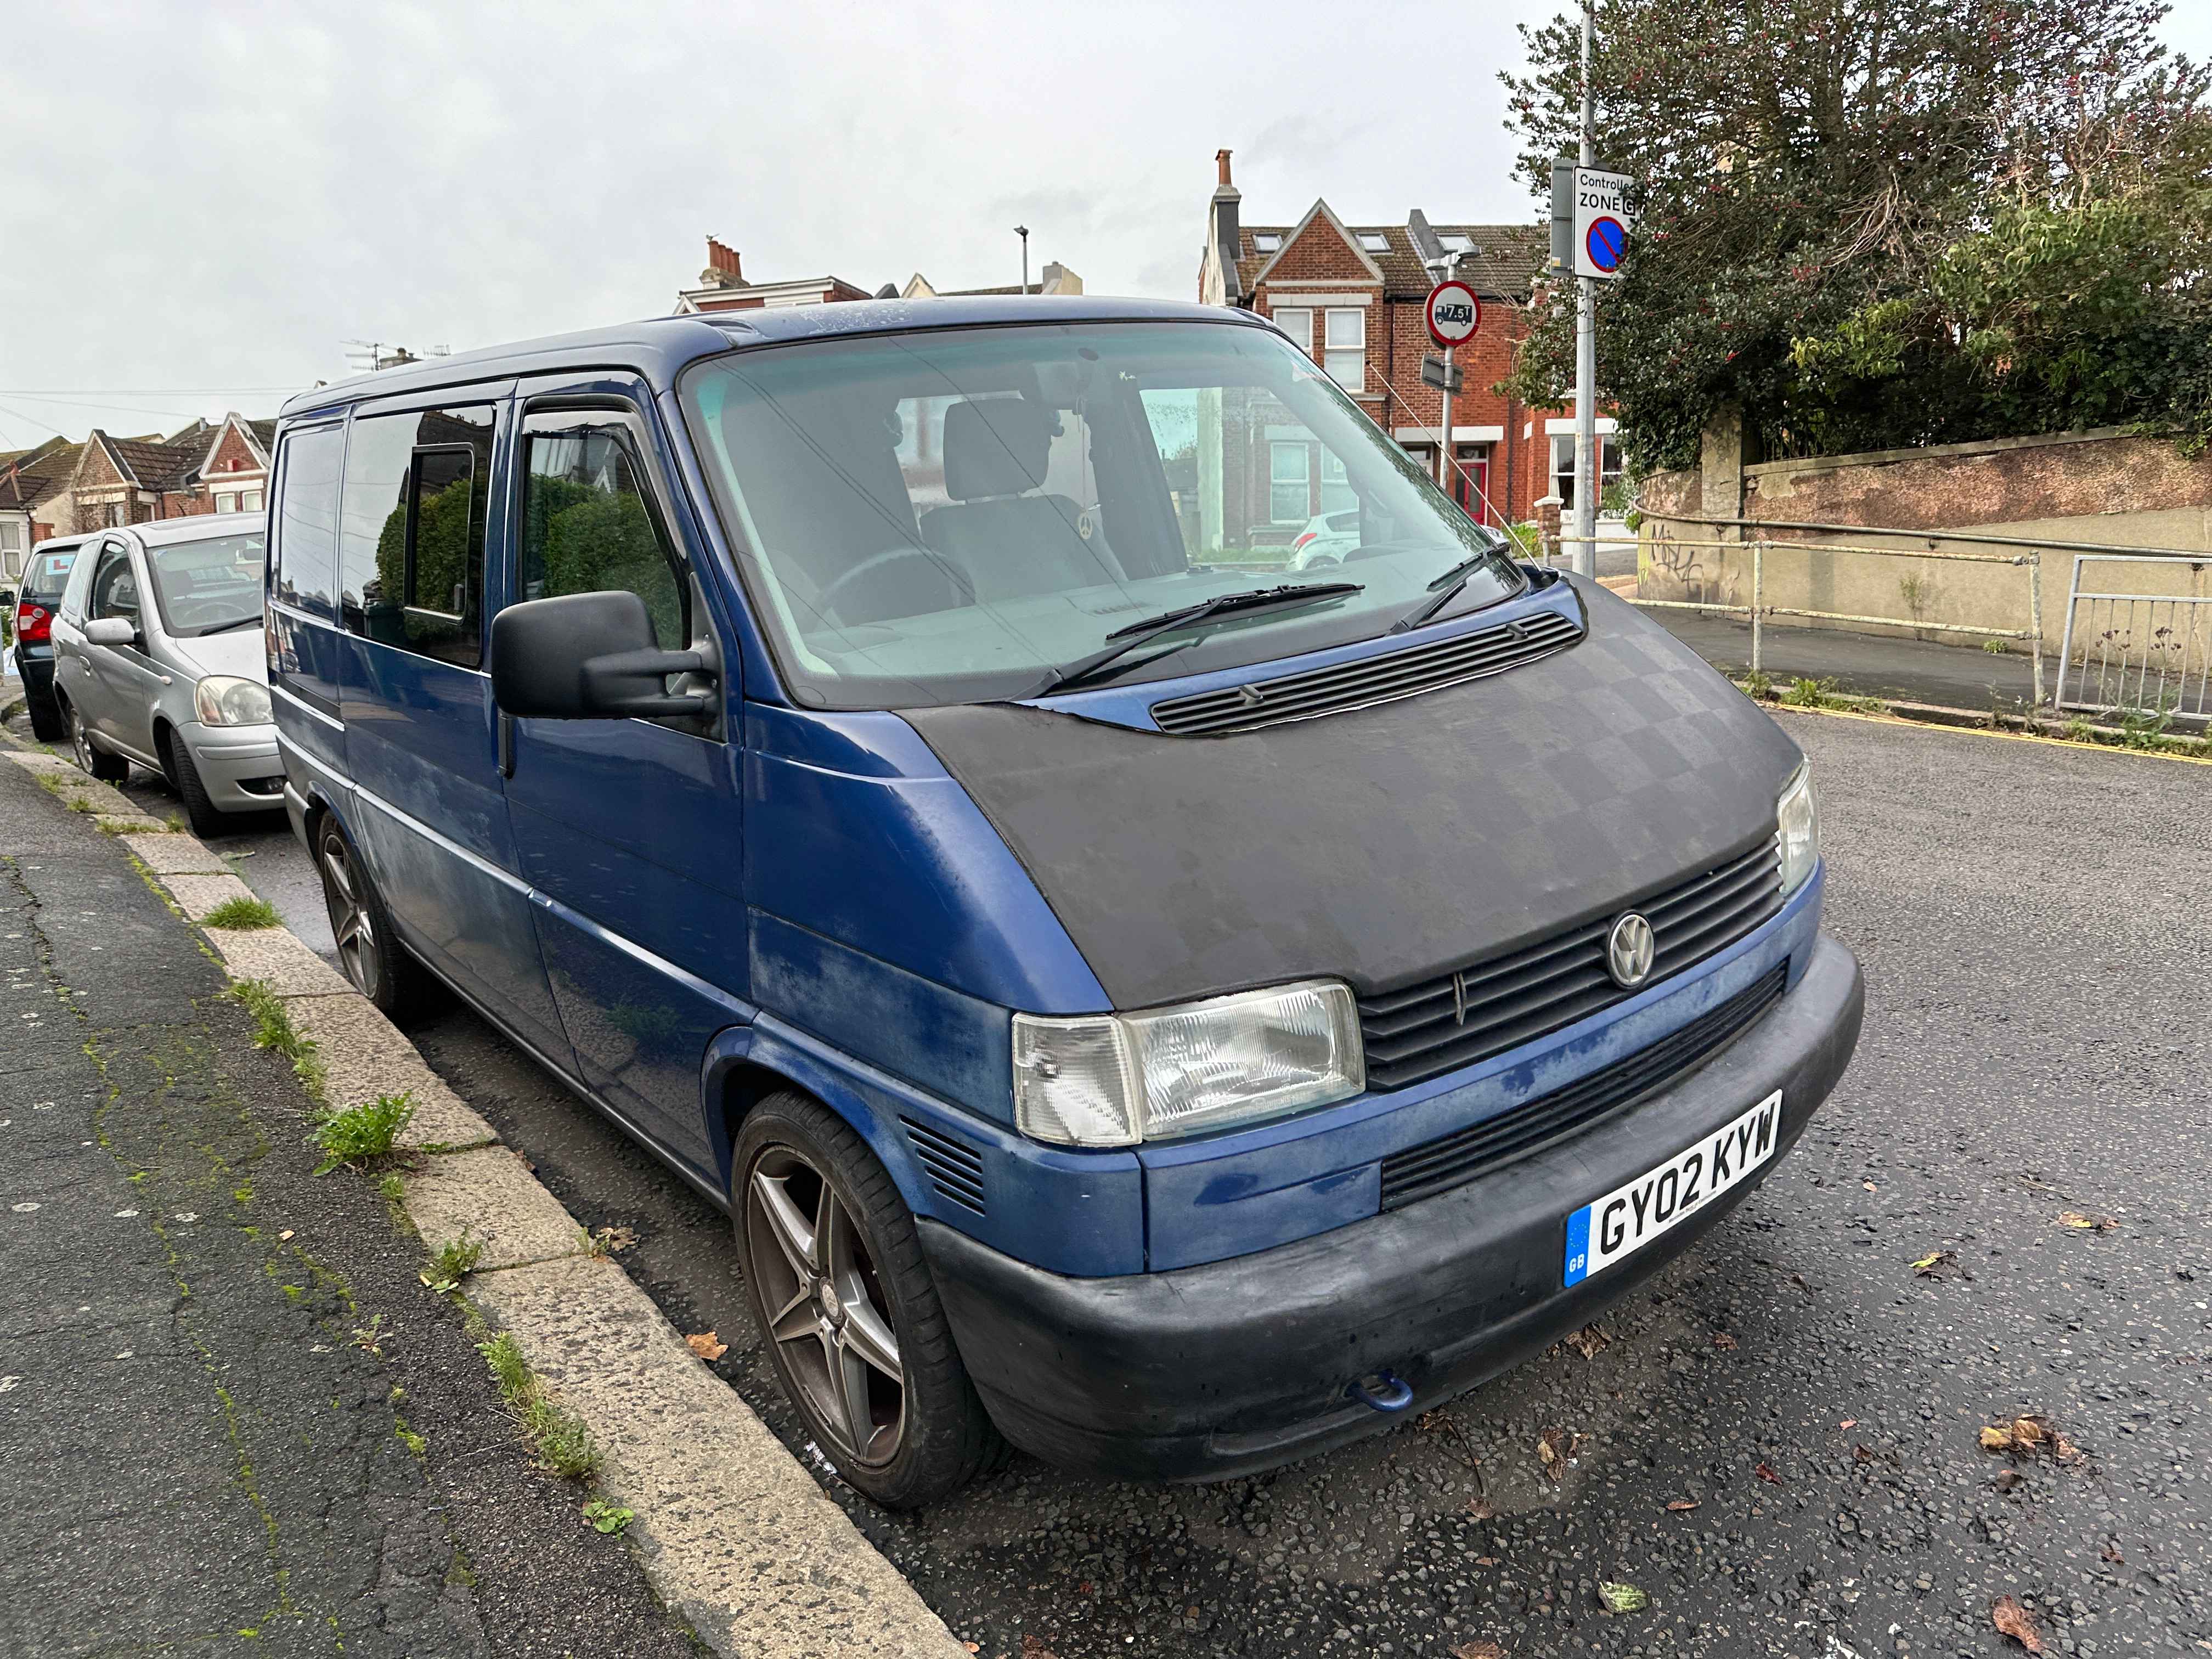 Photograph of GY02 KYW - a Blue Volkswagen Transporter camper van parked in Hollingdean by a non-resident. The fifteenth of eighteen photographs supplied by the residents of Hollingdean.